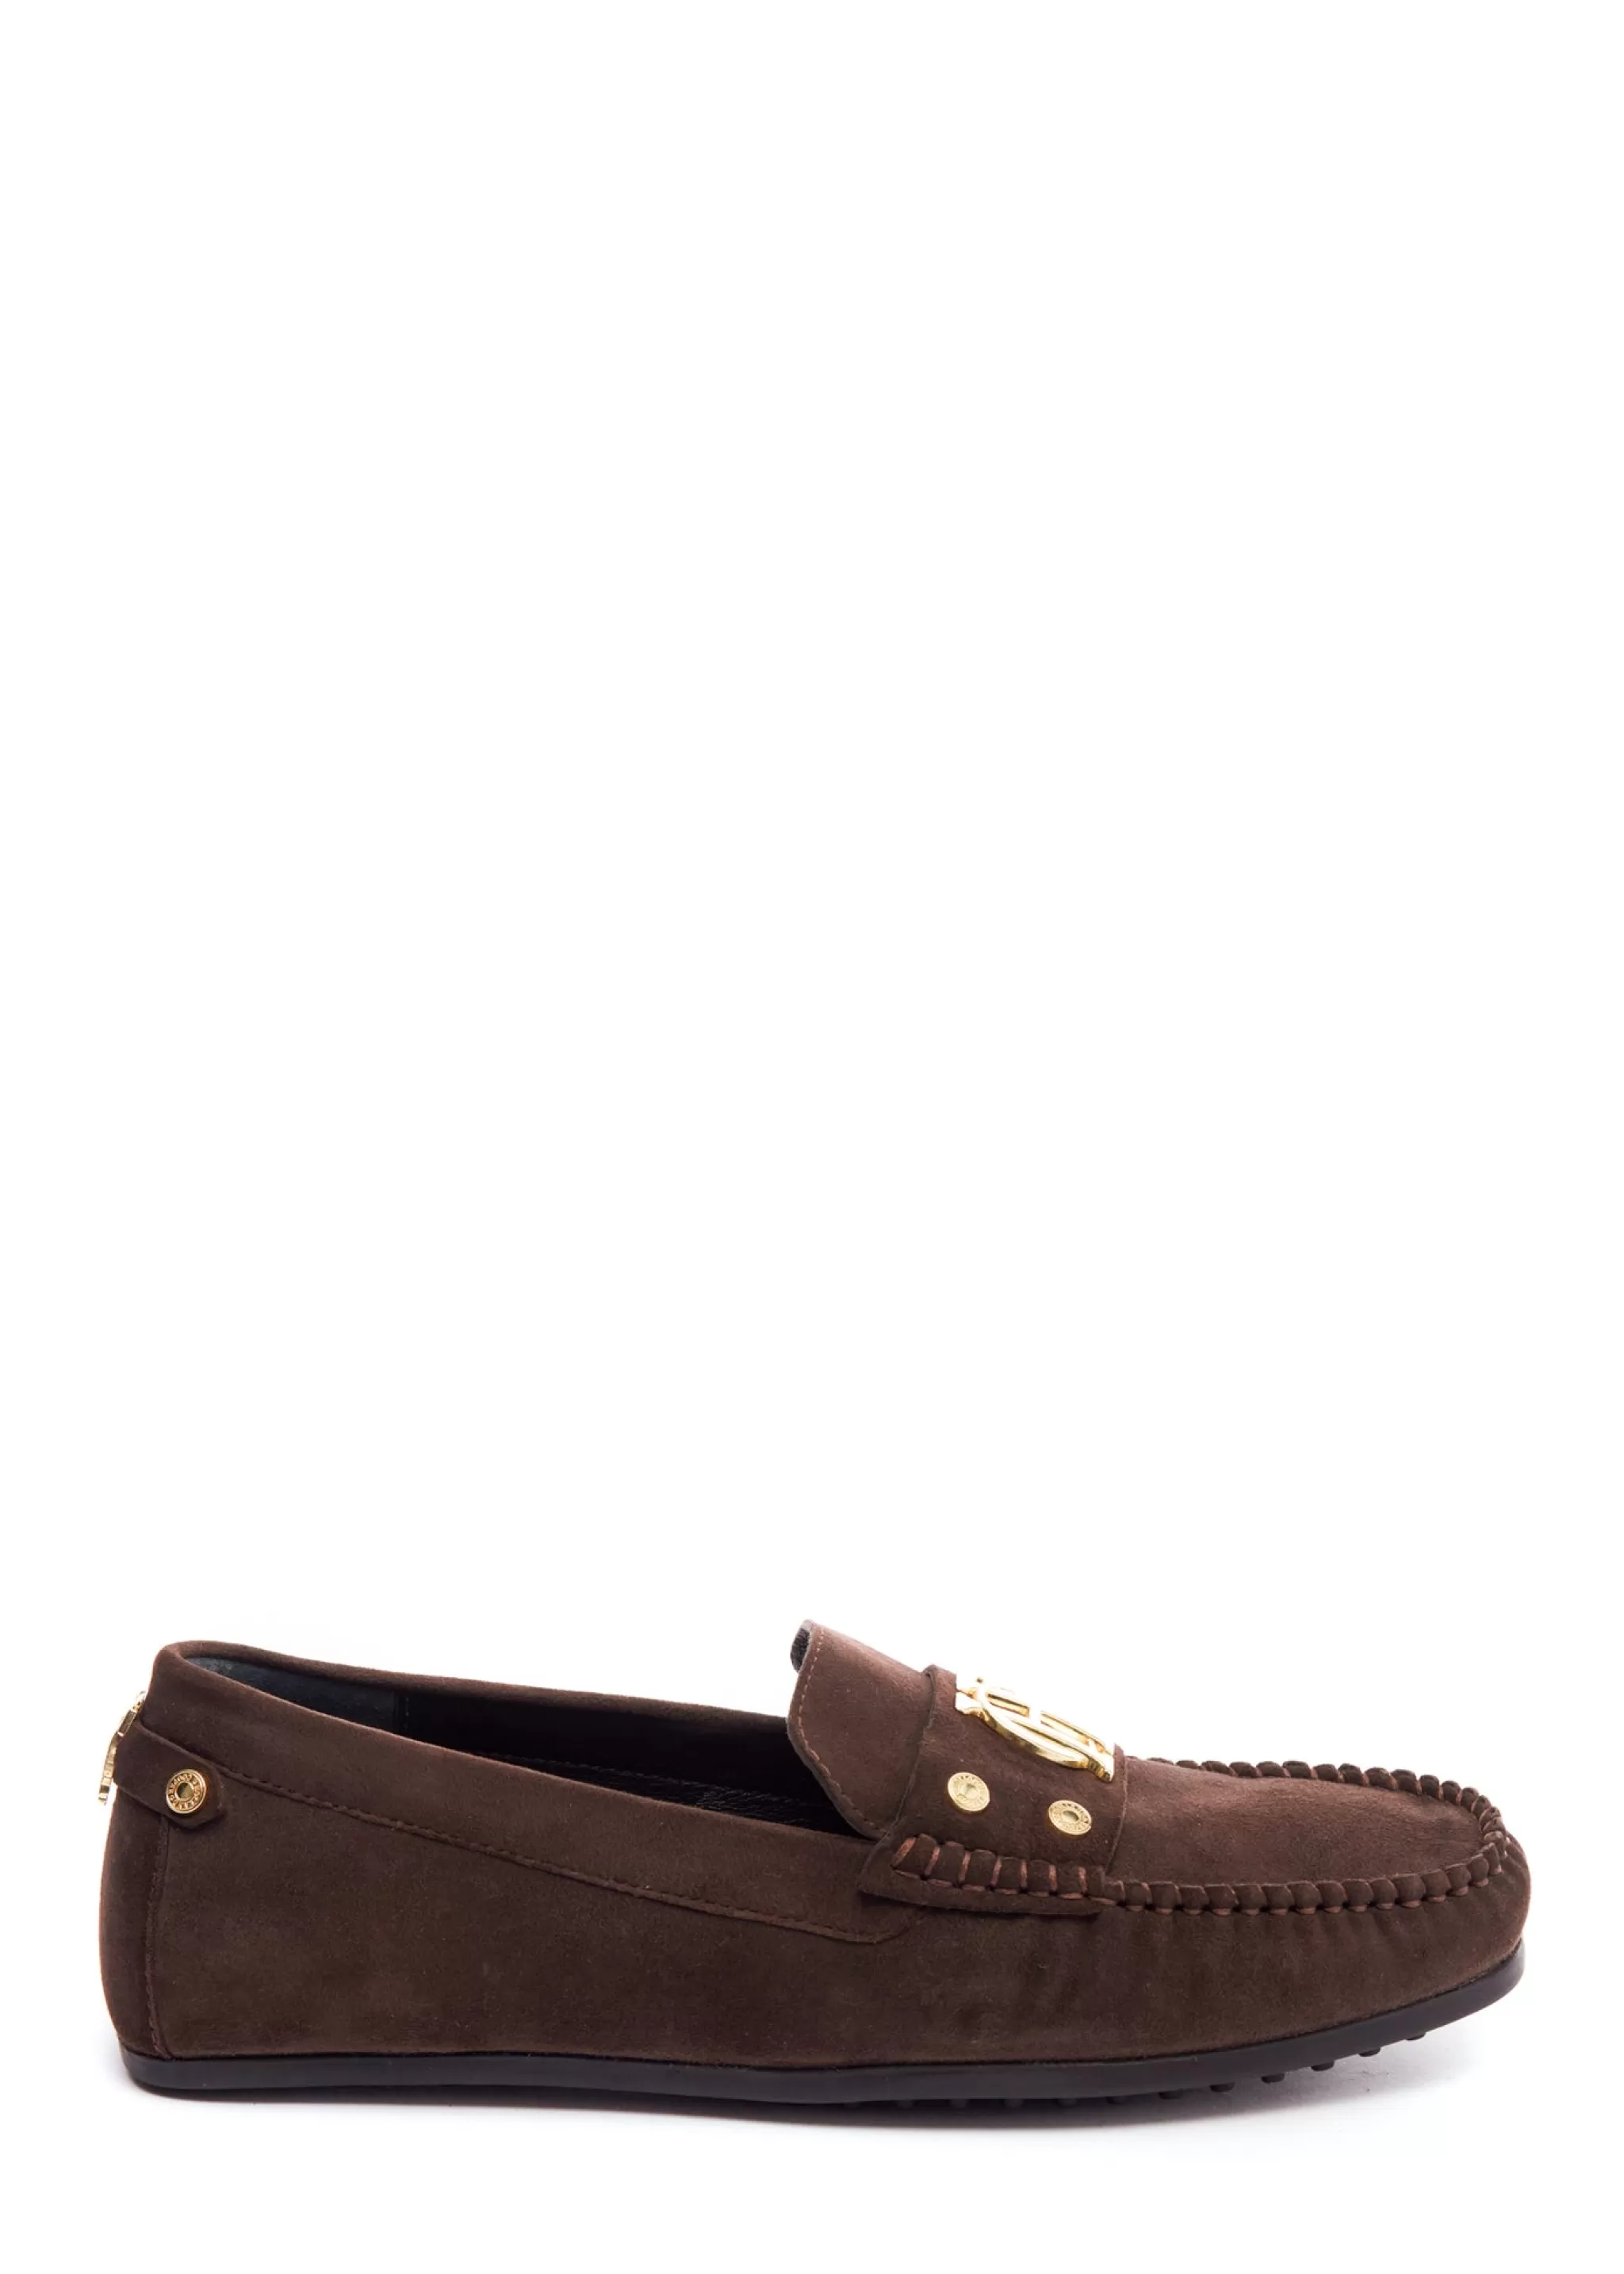 The Driving Loafer>Holland Cooper New